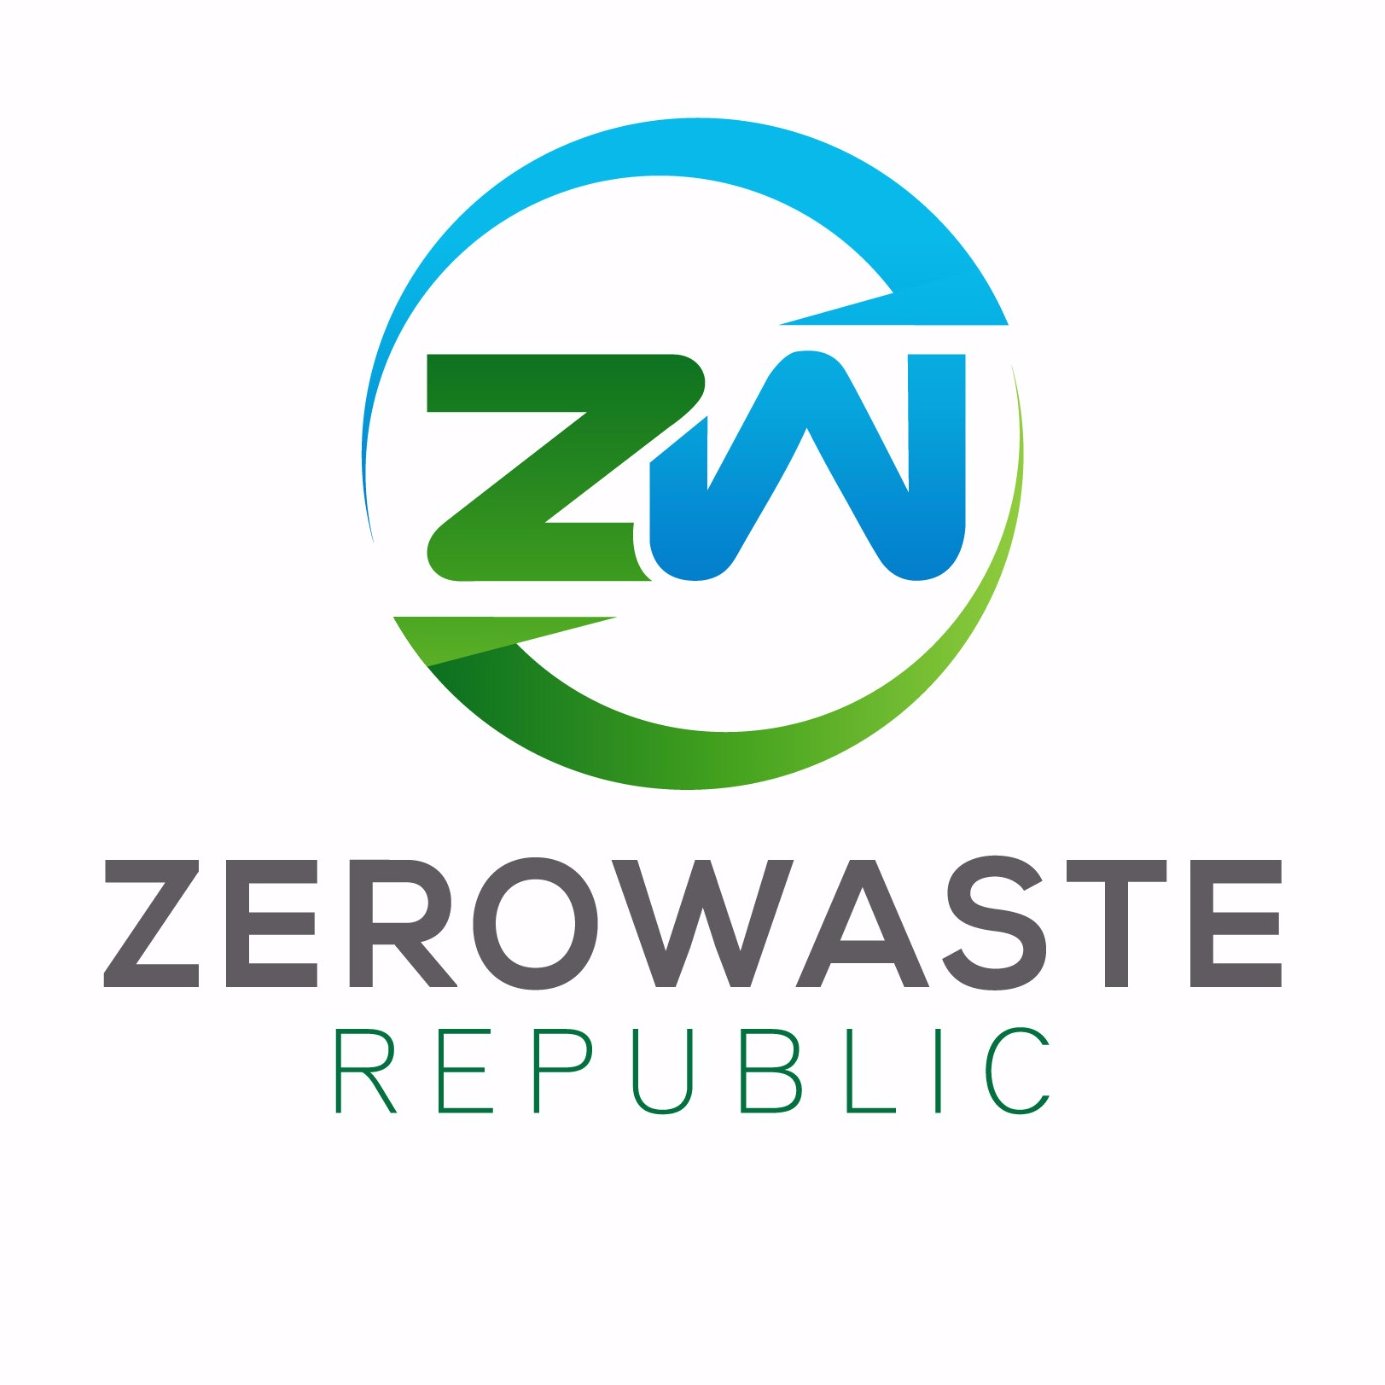 Zero Waste Republic is based in Ireland. We distribute sustainable alternatives to everyday products.